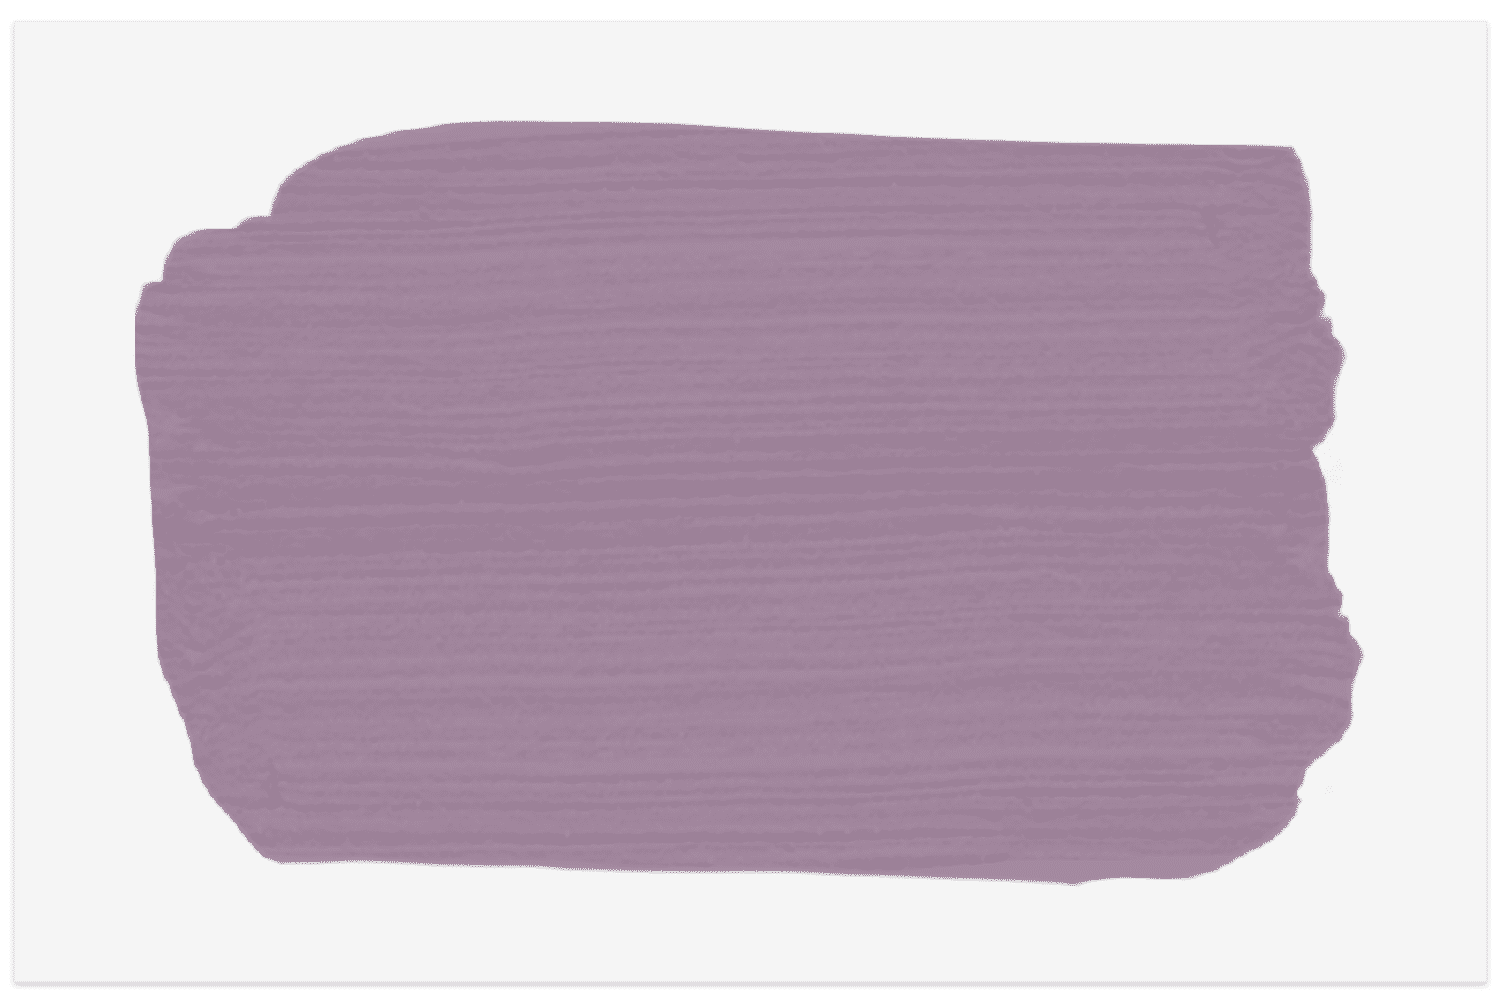 Sherwin-Williams Radiant Lilac paint swatch